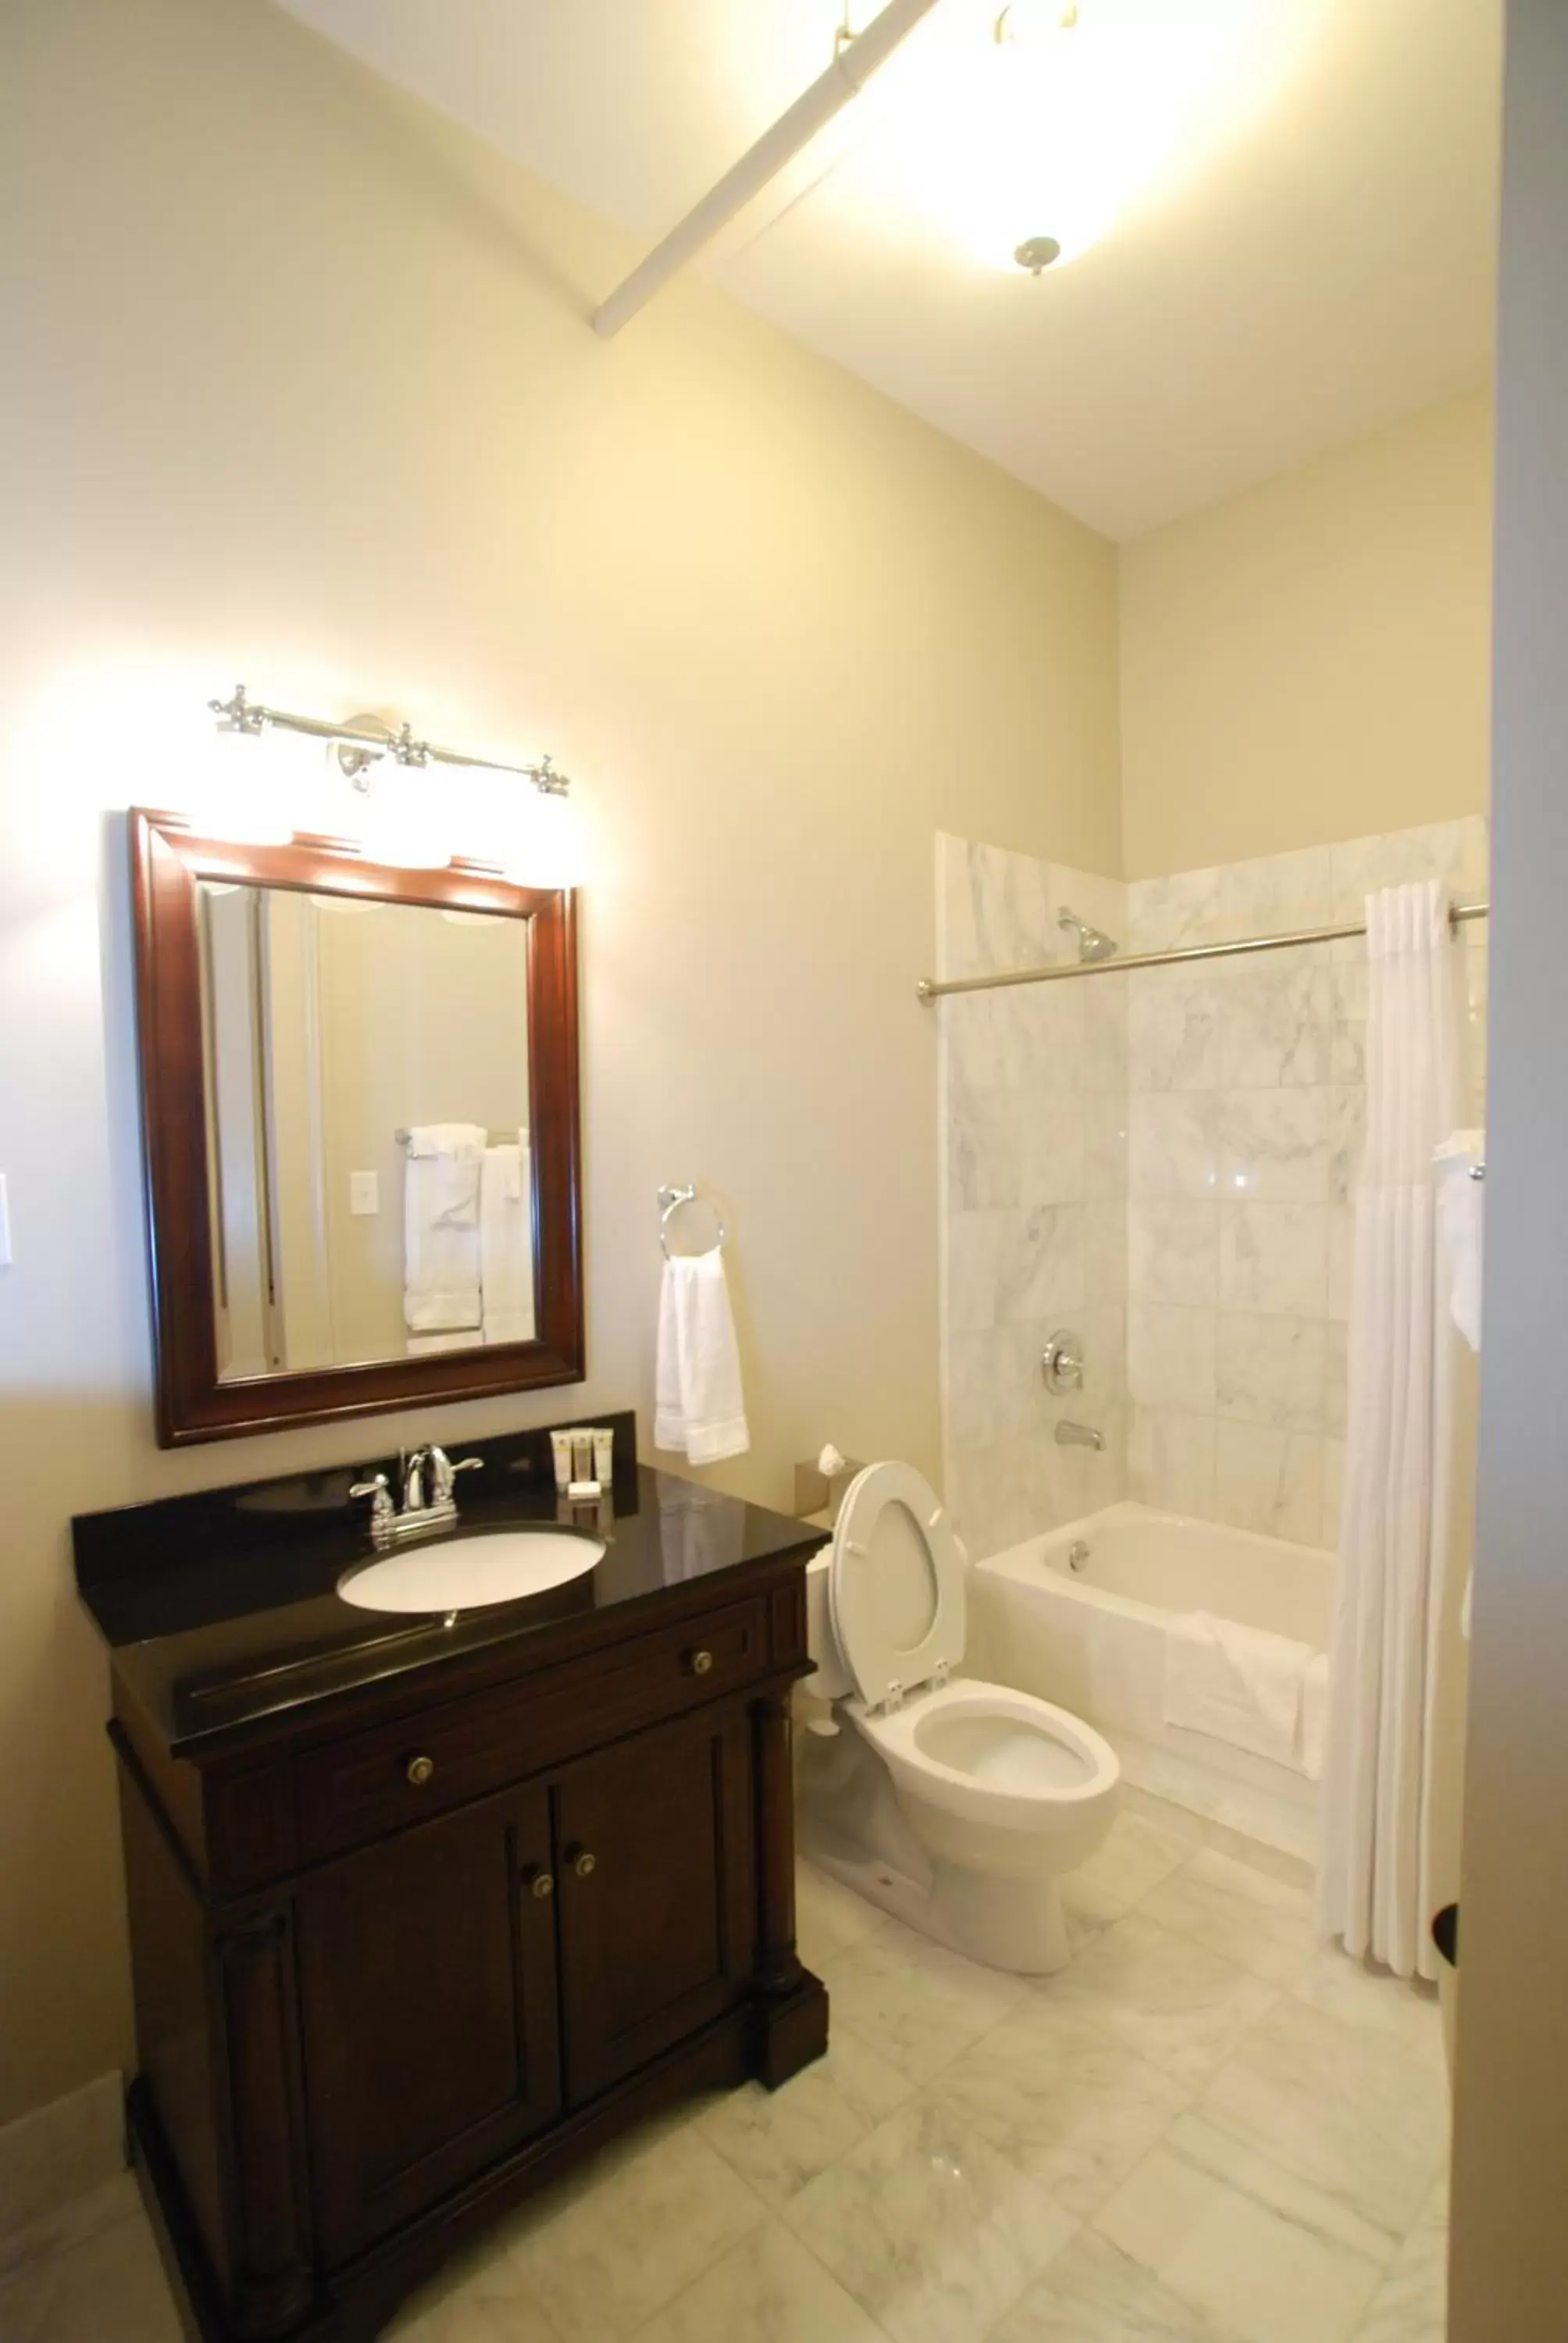 Bathroom in Inn on Ursulines, a French Quarter Guest Houses Property